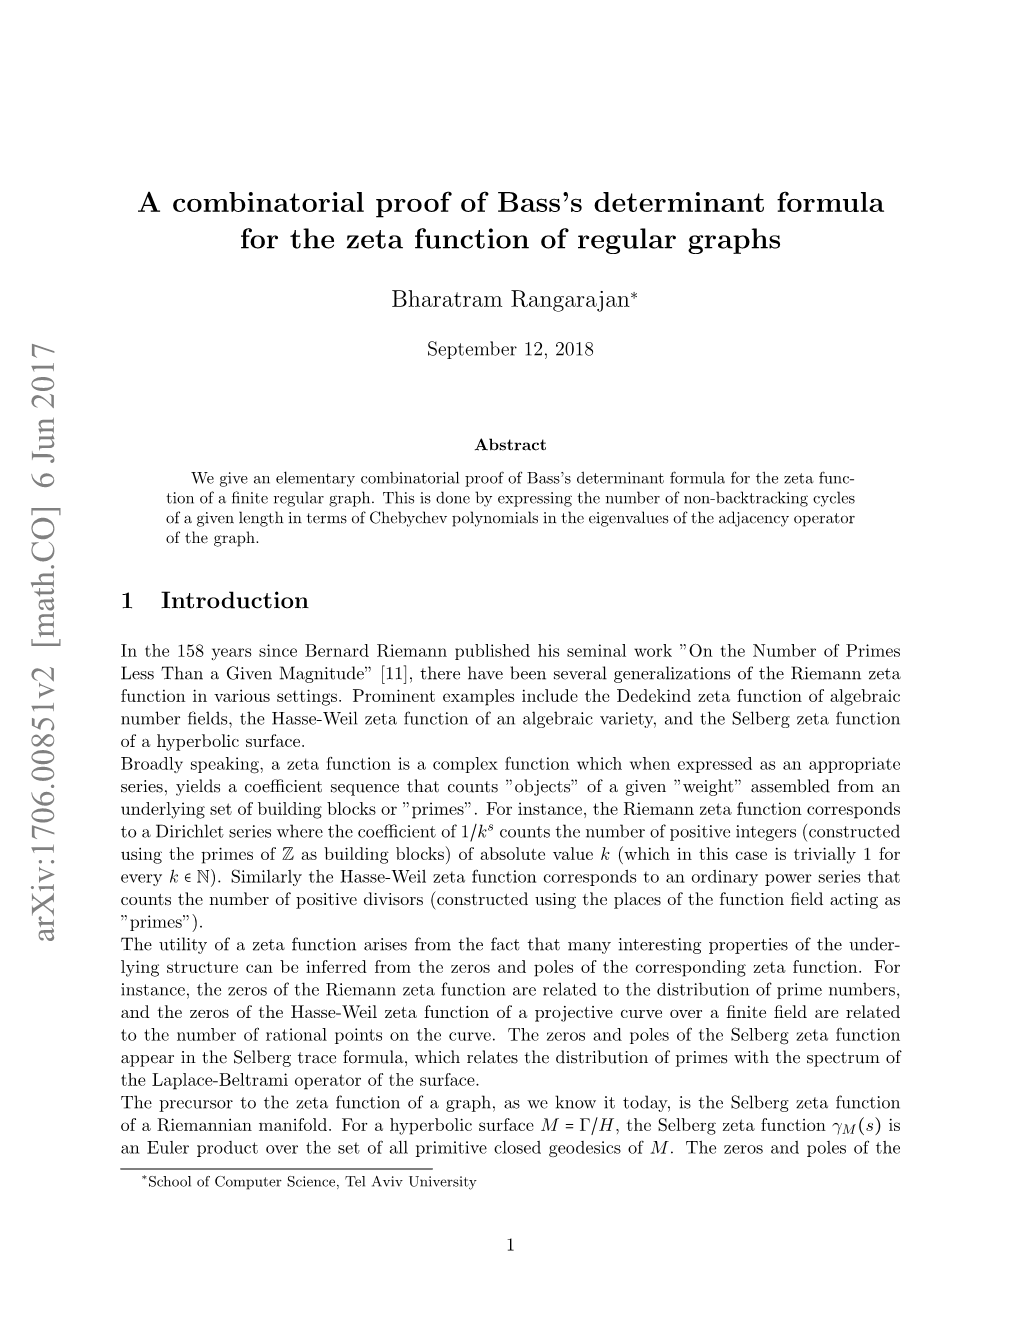 A Combinatorial Proof of Bass's Determinant Formula for the Zeta